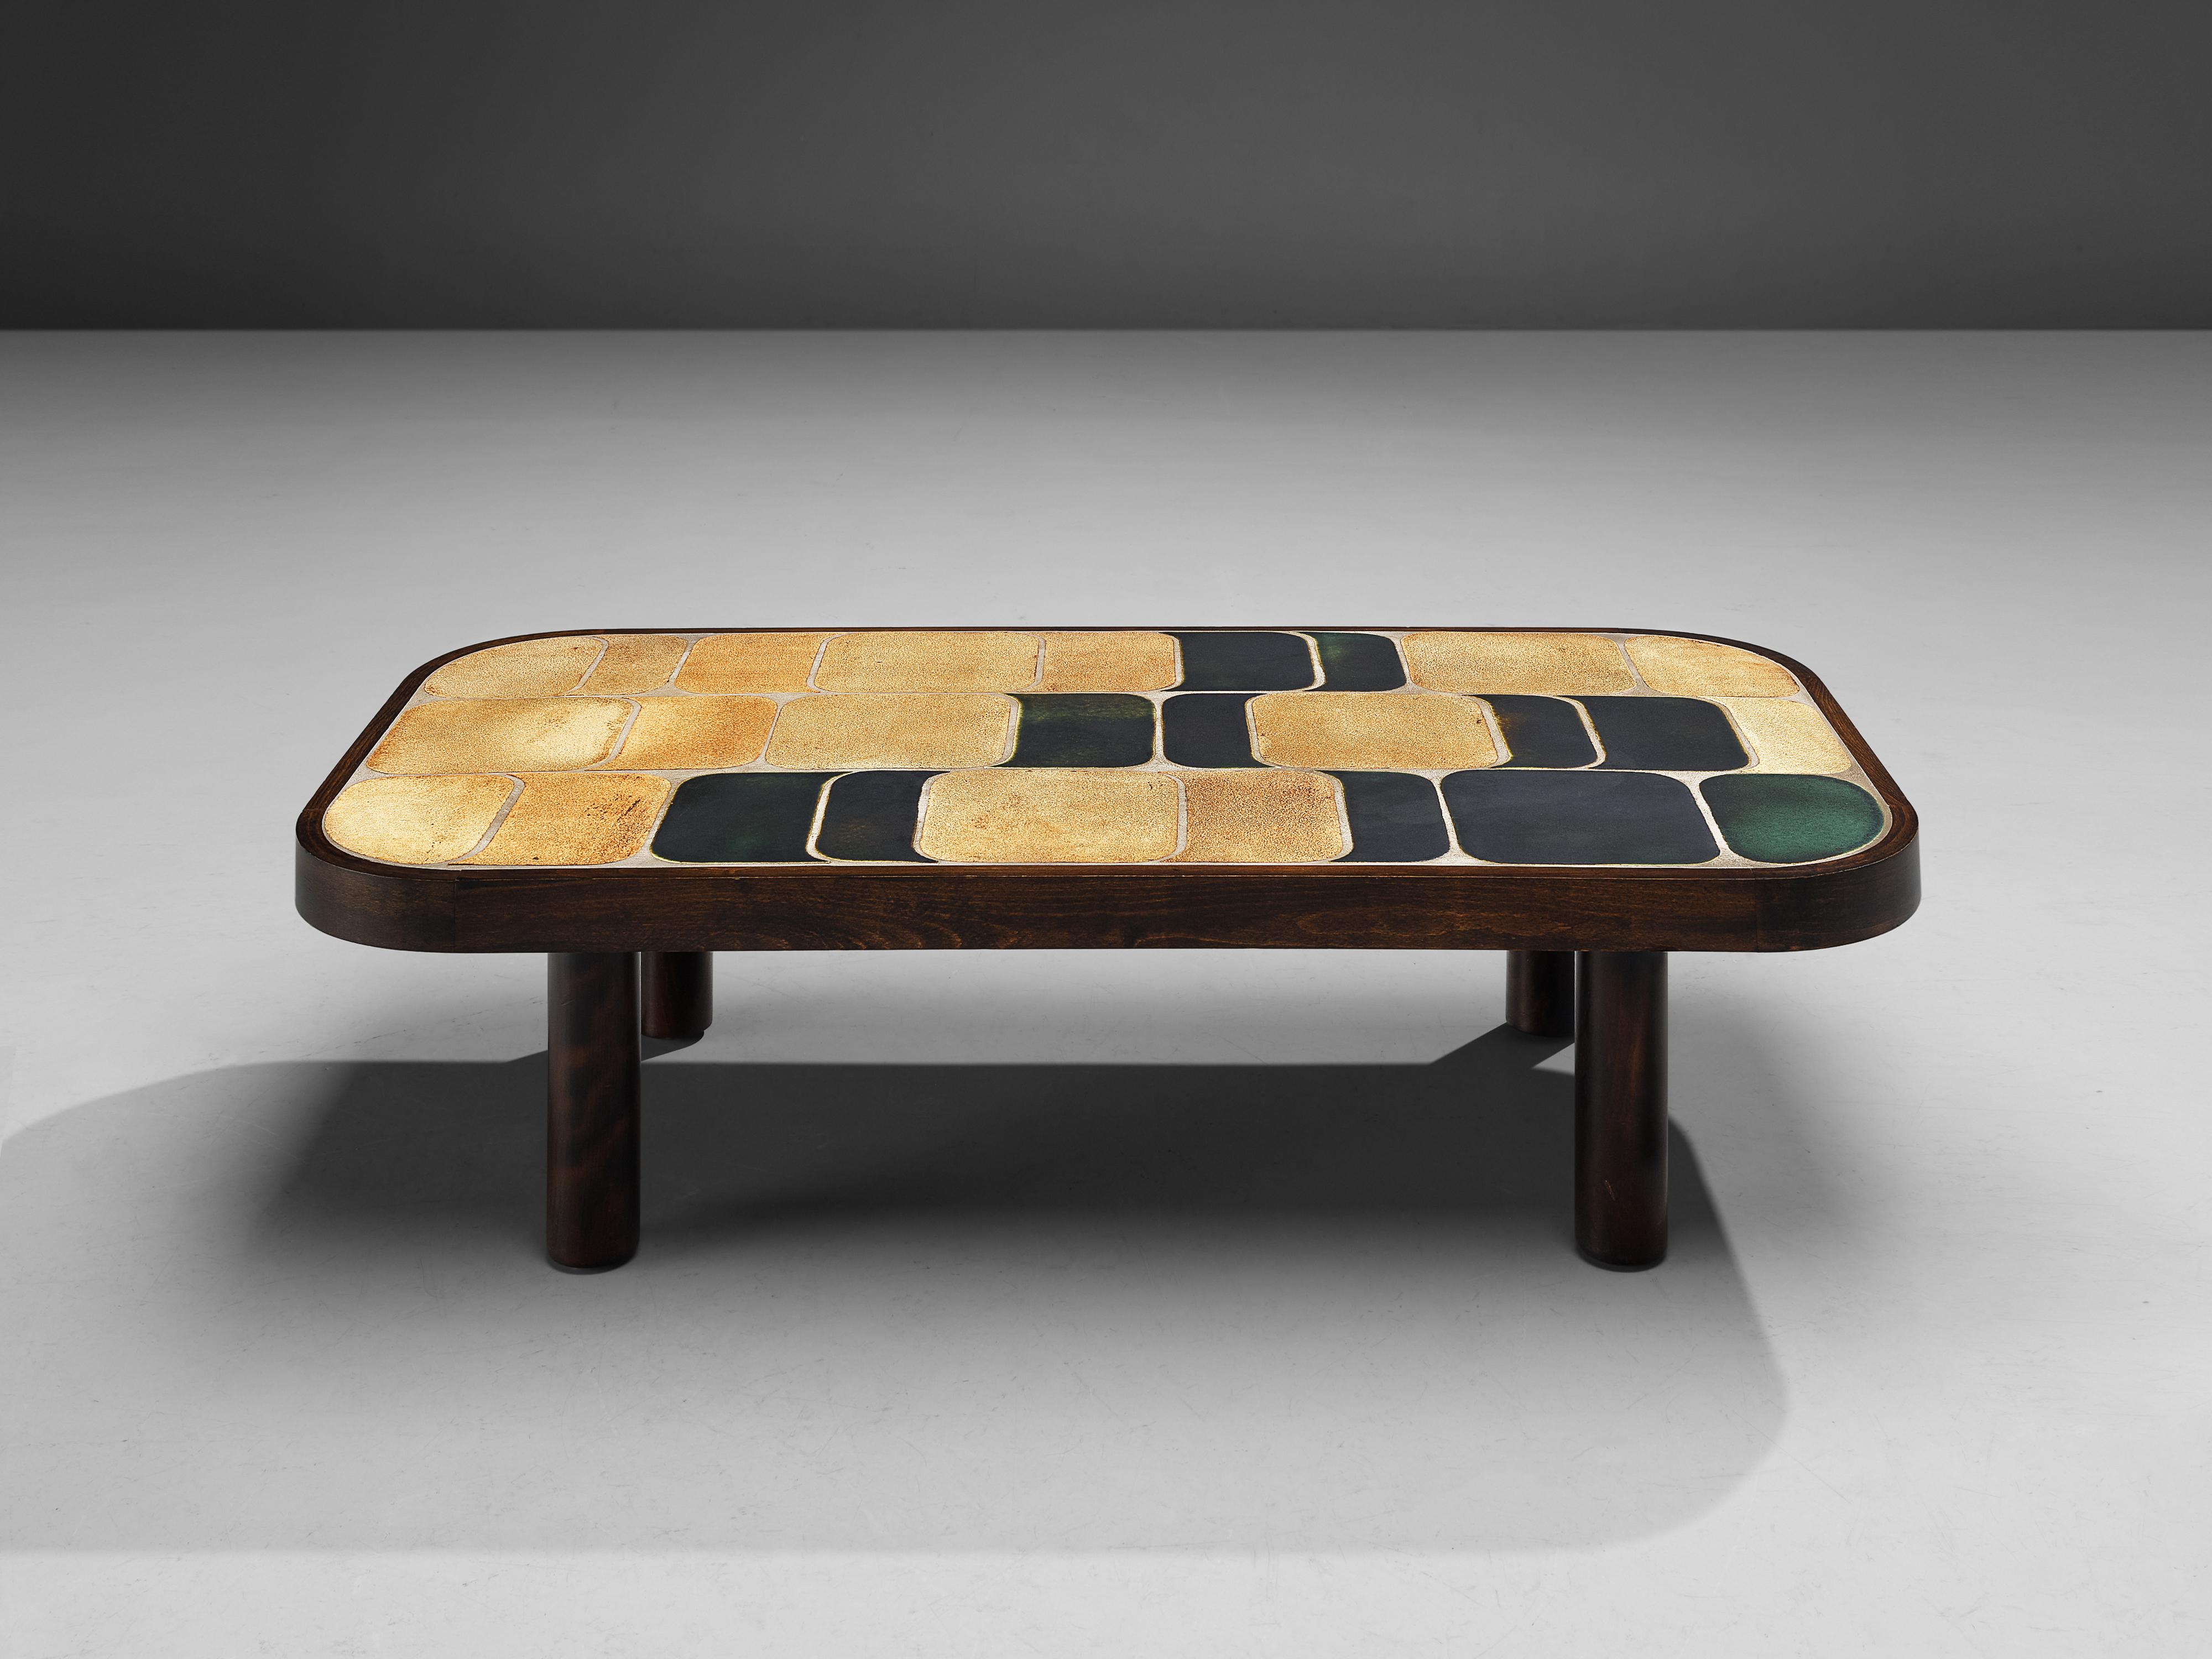 Roger Capron, 'Shogun’ coffee table, bi-color ceramic, beech, France, 1960s

French coffee table with wonderful composed ceramic tiles by French designer Roger Capron. Both the tiles as well as the frame feature rounded corners. The tiles have